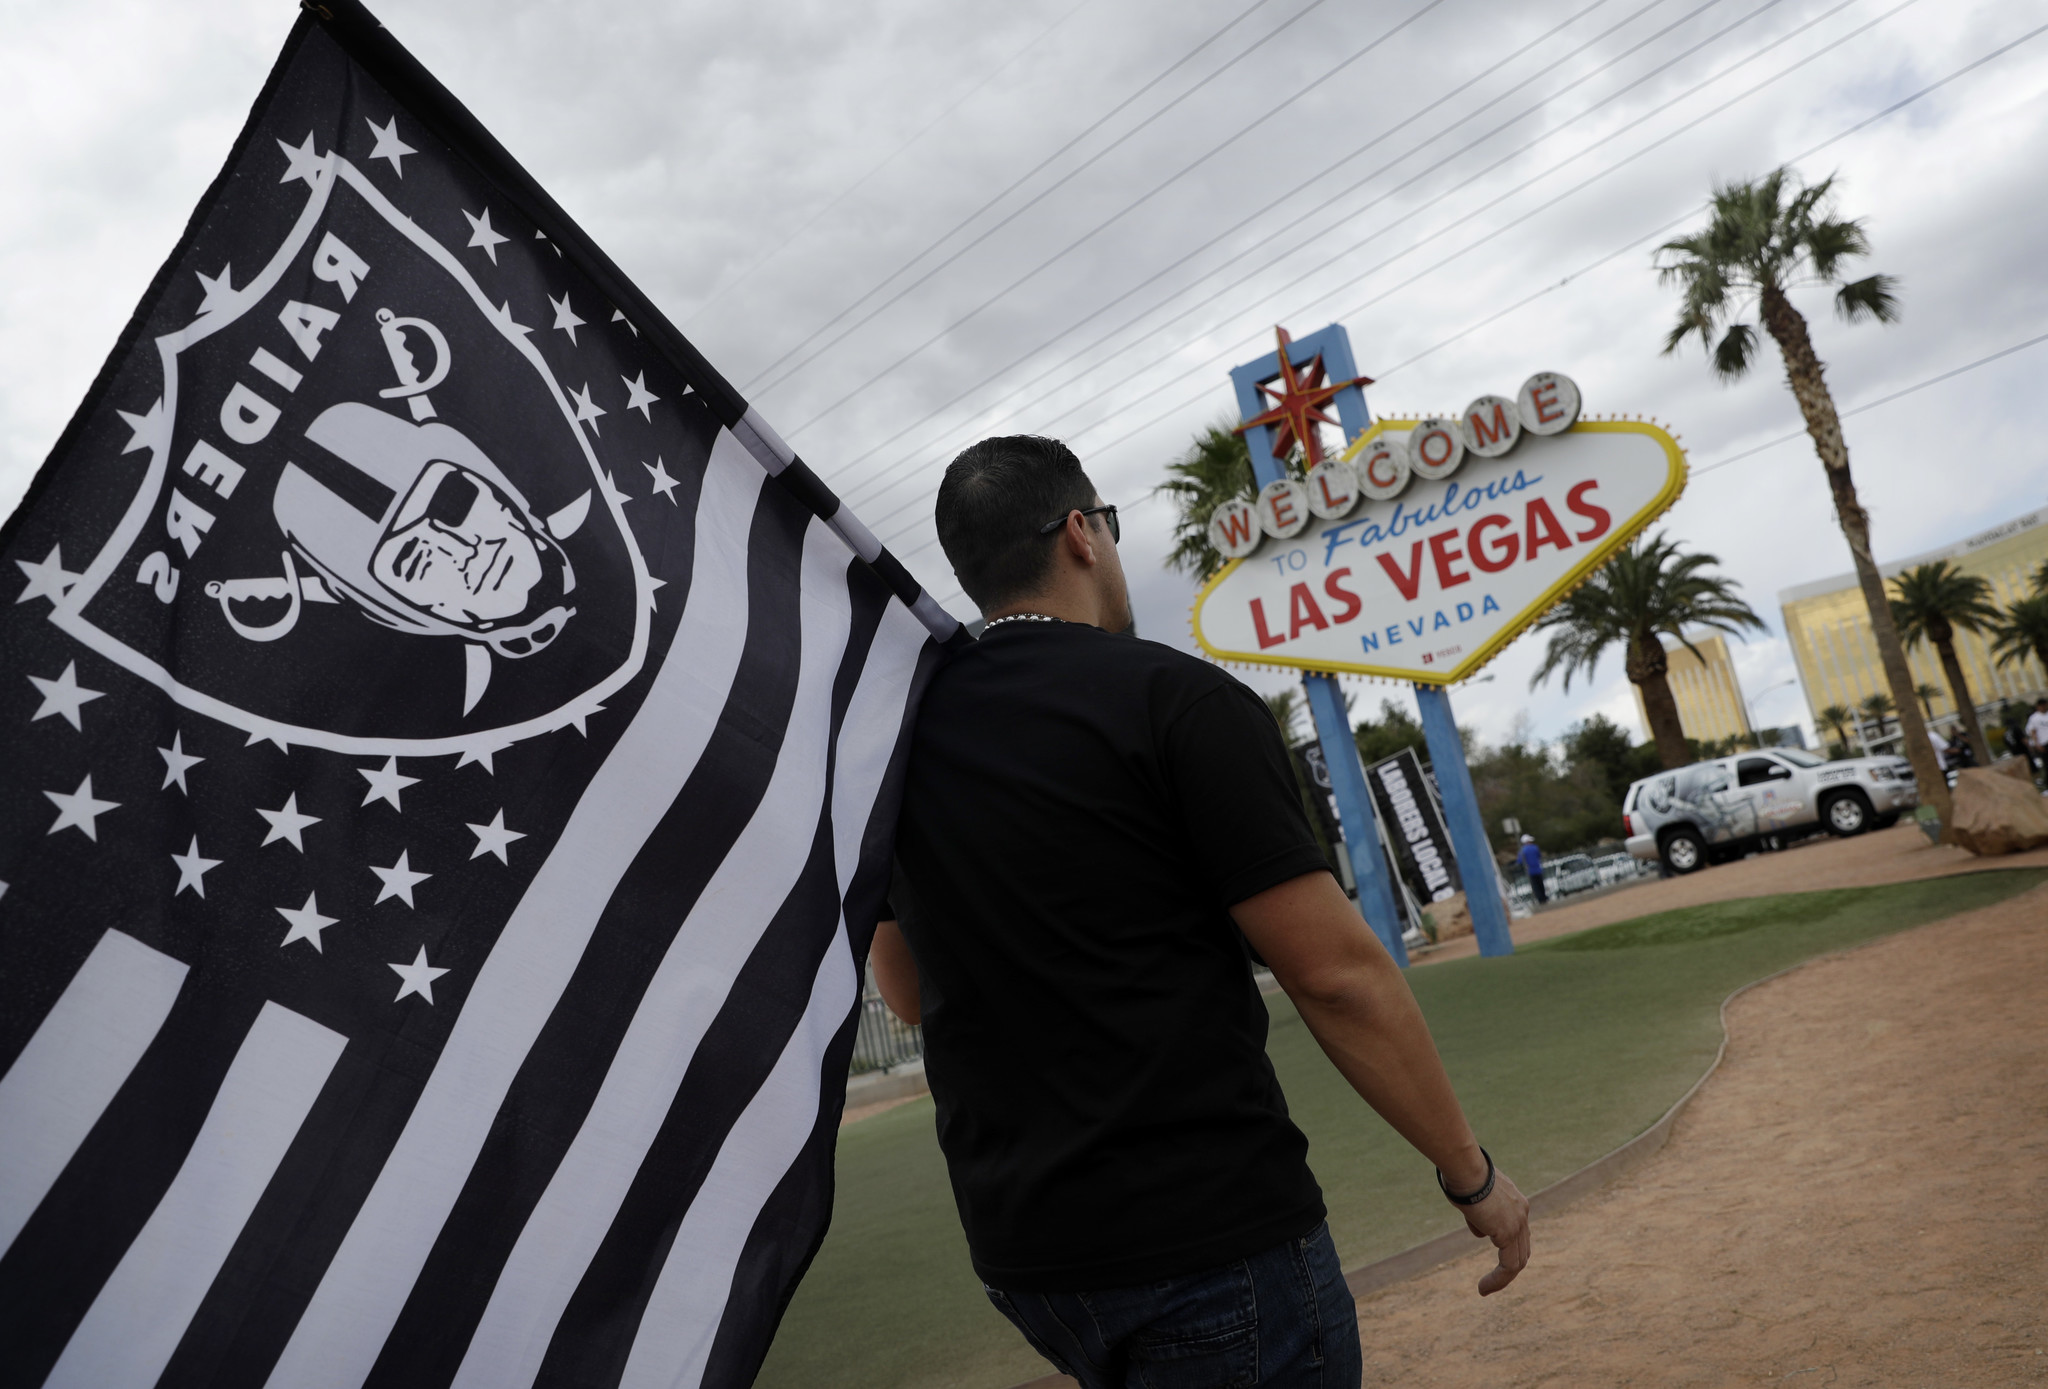 Raiders could be quite the road rage with traveling NFL circus - Chicago Tribune